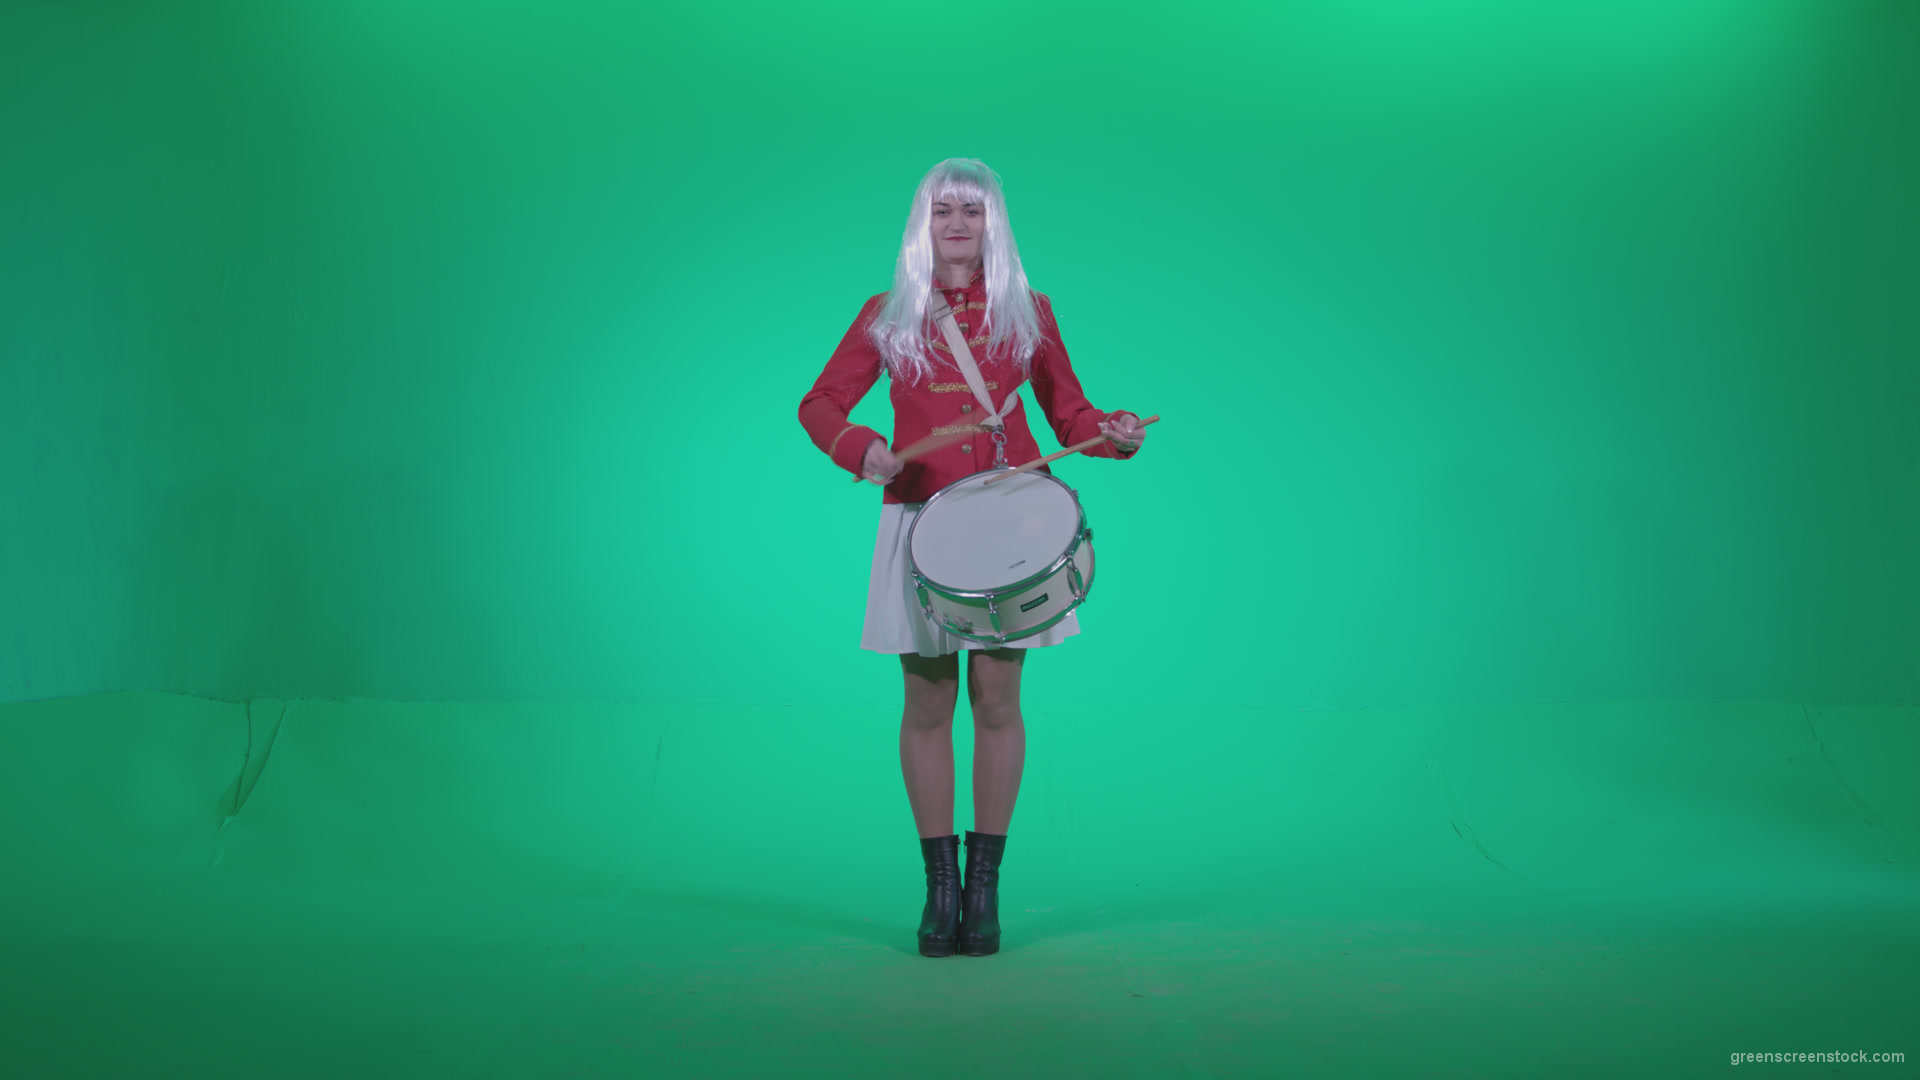 Snare-Drumming-girl-with-white-haire-z1_006 Green Screen Stock